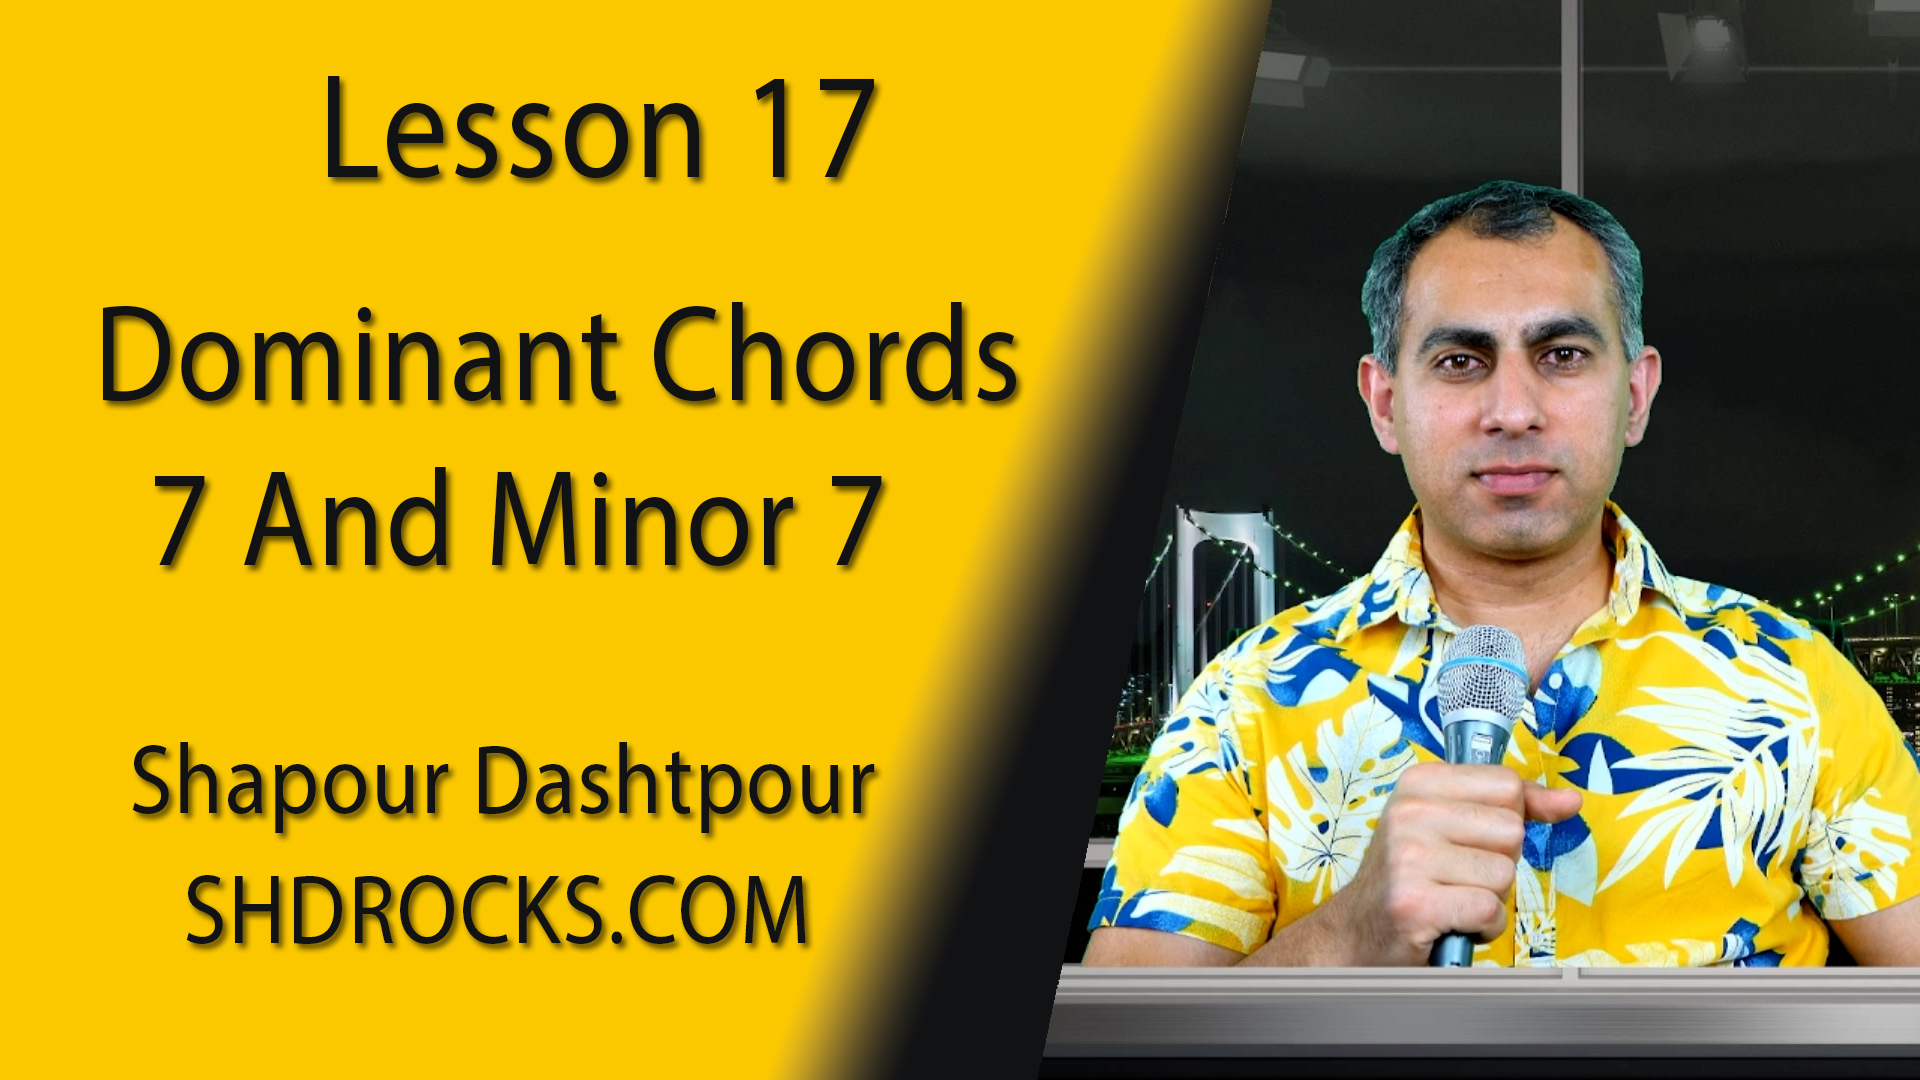 Lesson 17 - Dominant Chords - 7 and m7 - 2-6-24